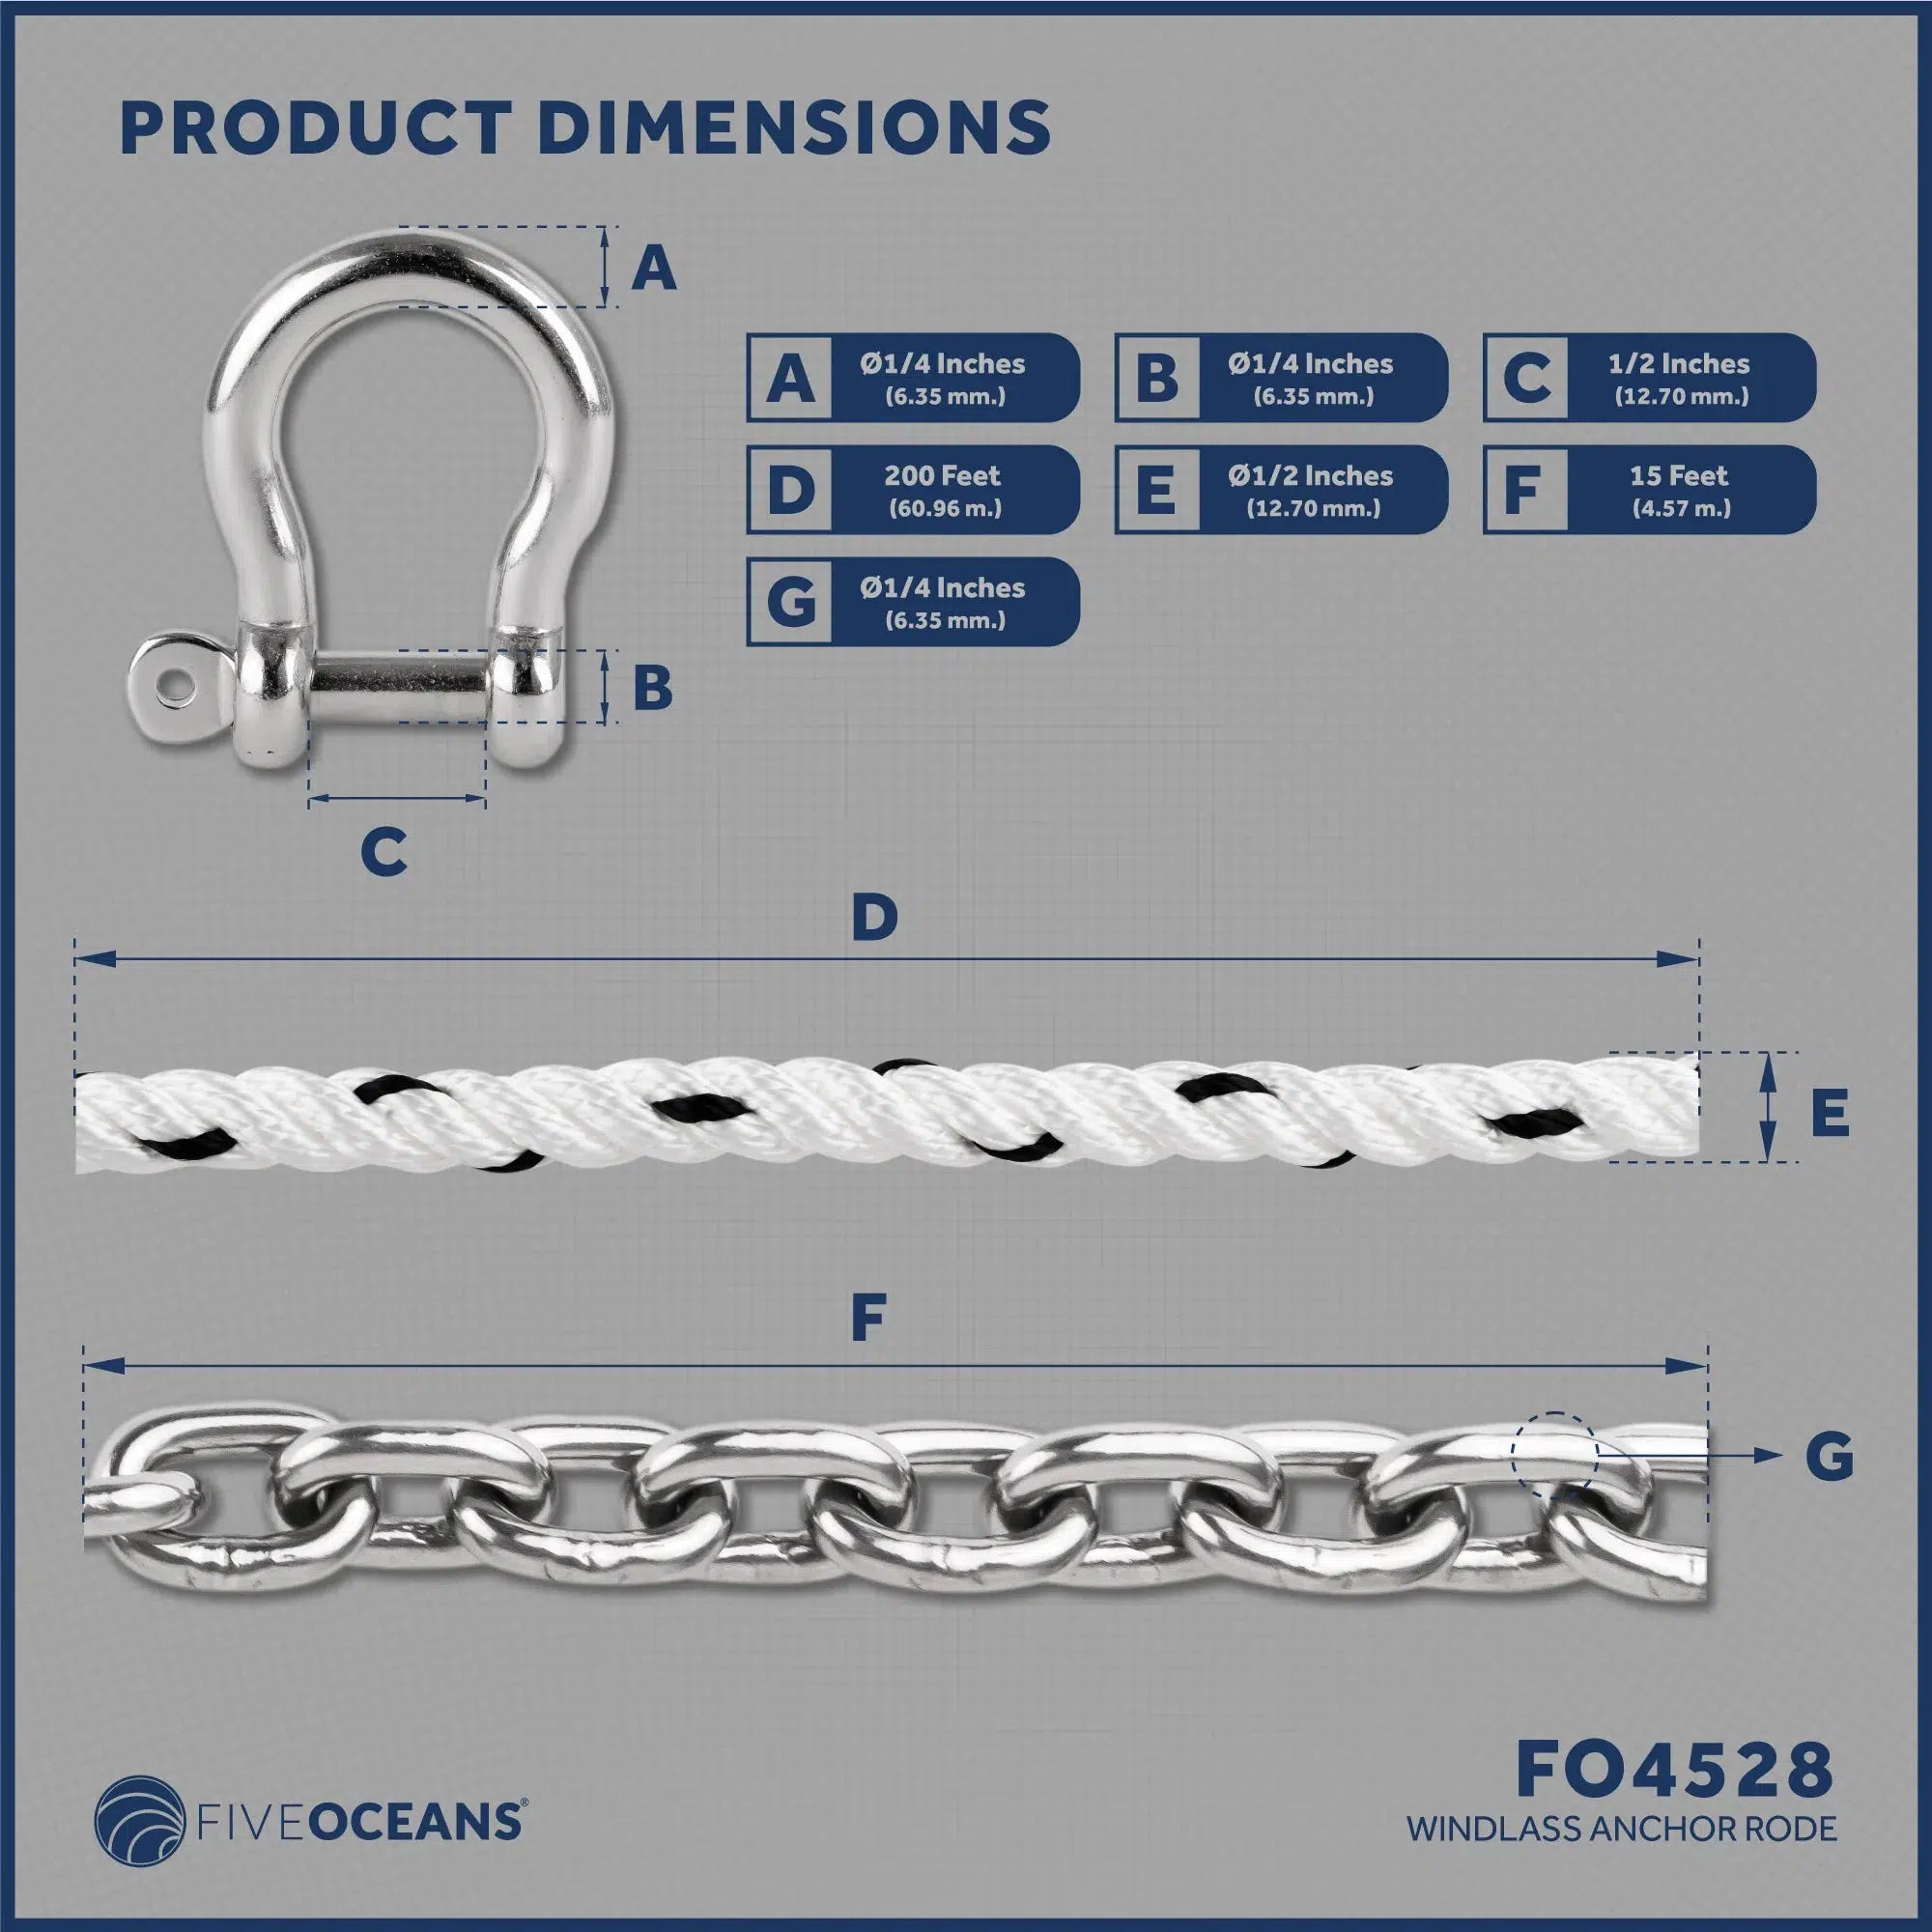 Windlass Anchor Rode, 1/2" x 200' Nylon 3-Strand Rope, 1/4 x 15' G4 Stainless Steel Chain - Five Oceans-Canadian Marine &amp; Outdoor Equipment